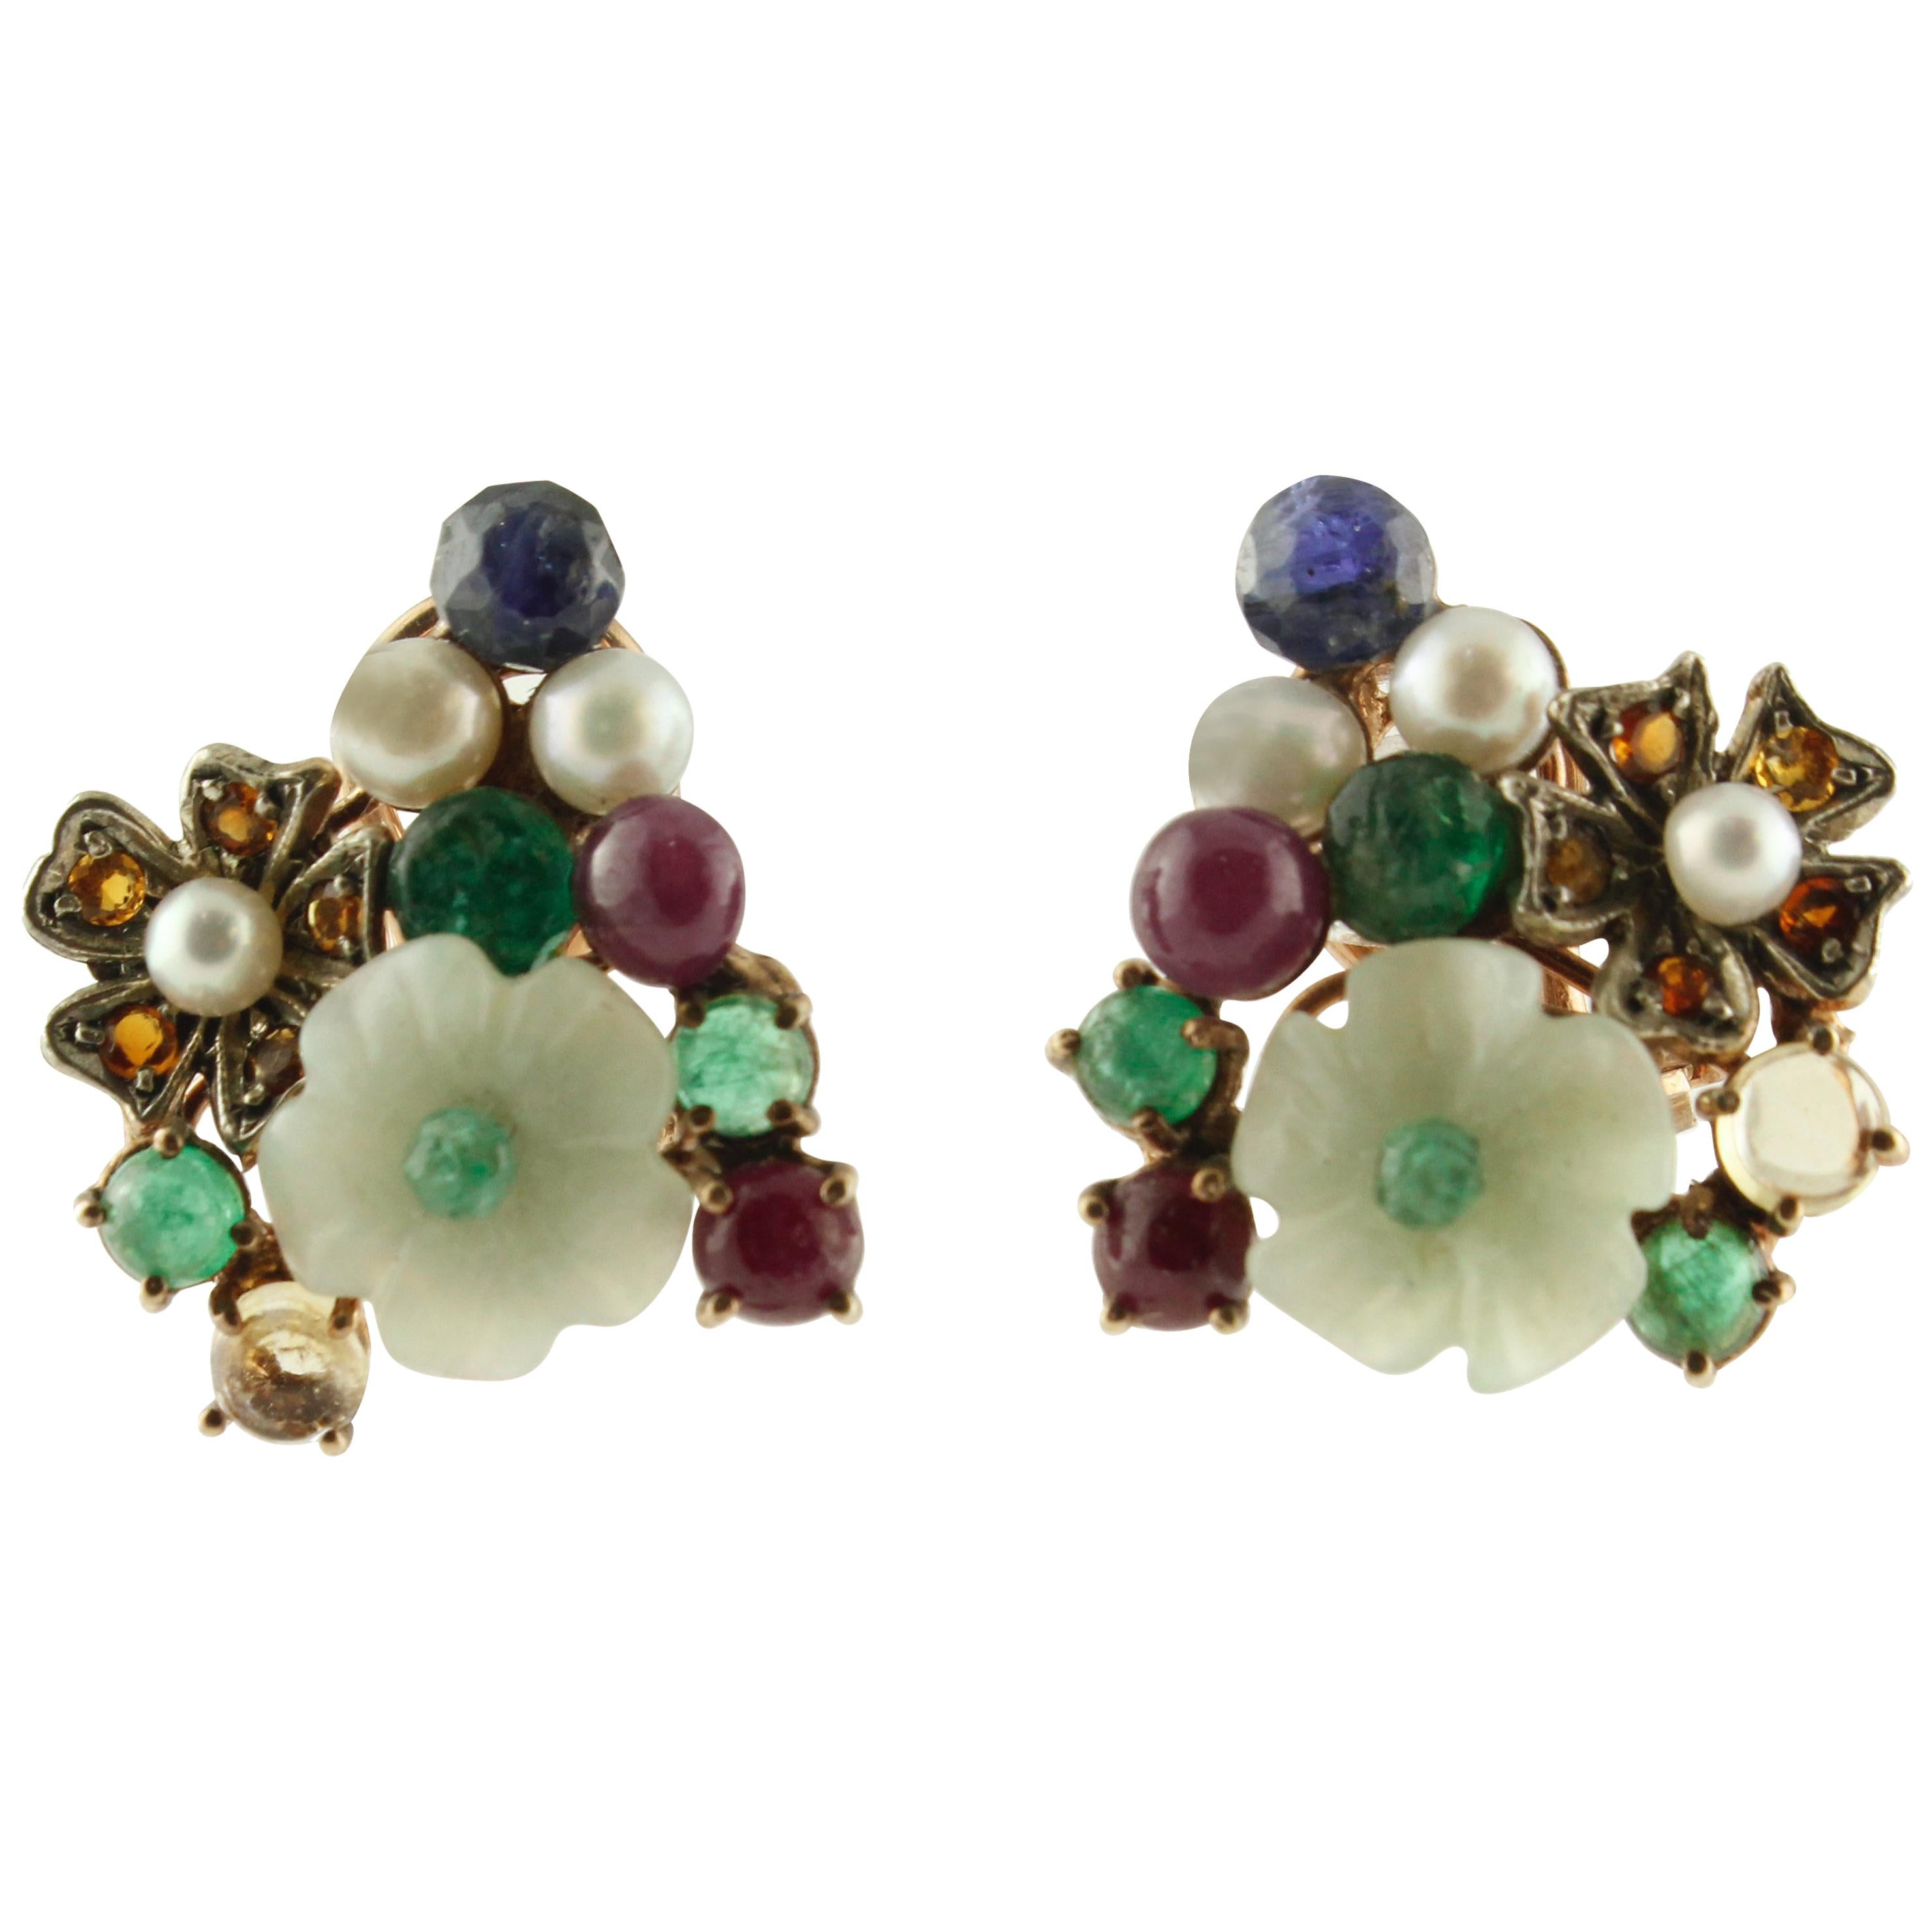 Rubies, Sapphires Emeralds Mother-of-Pearl Pearls Rose Gold and Silver Earrings